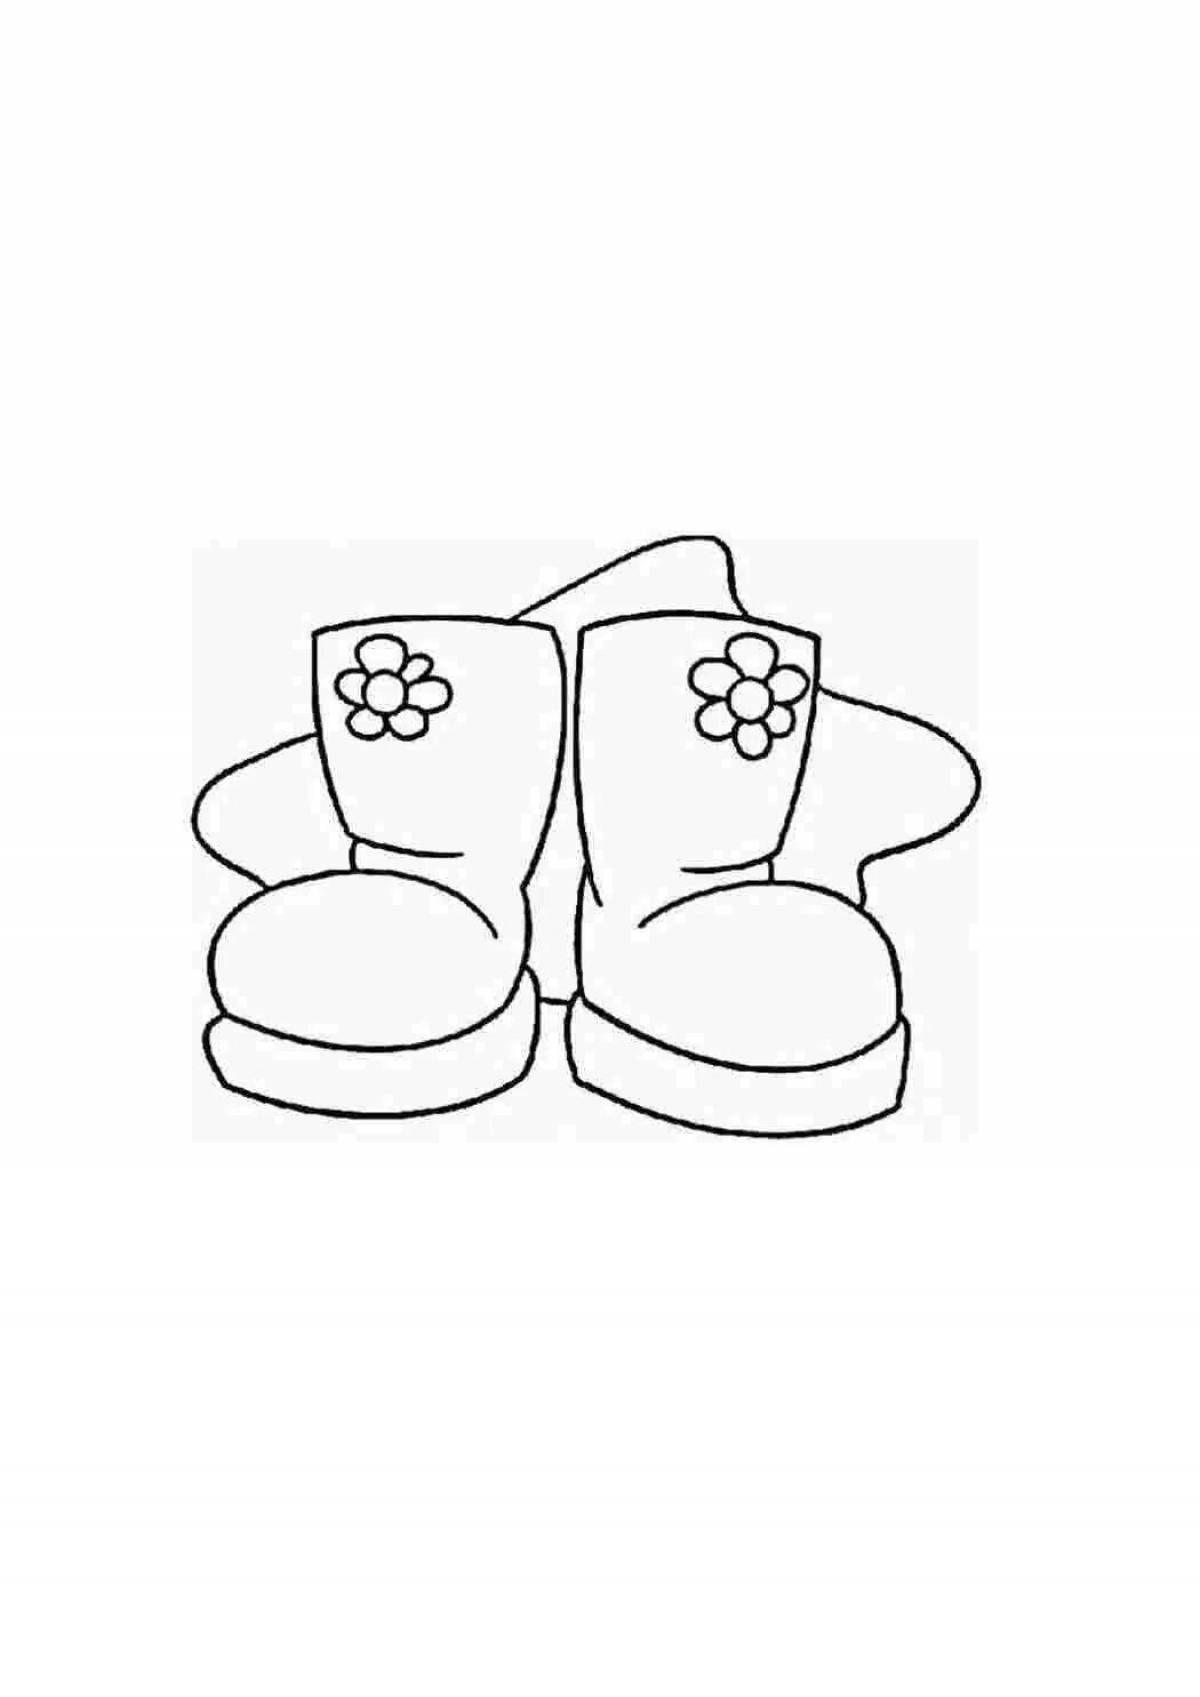 Merry winter shoes coloring book for children